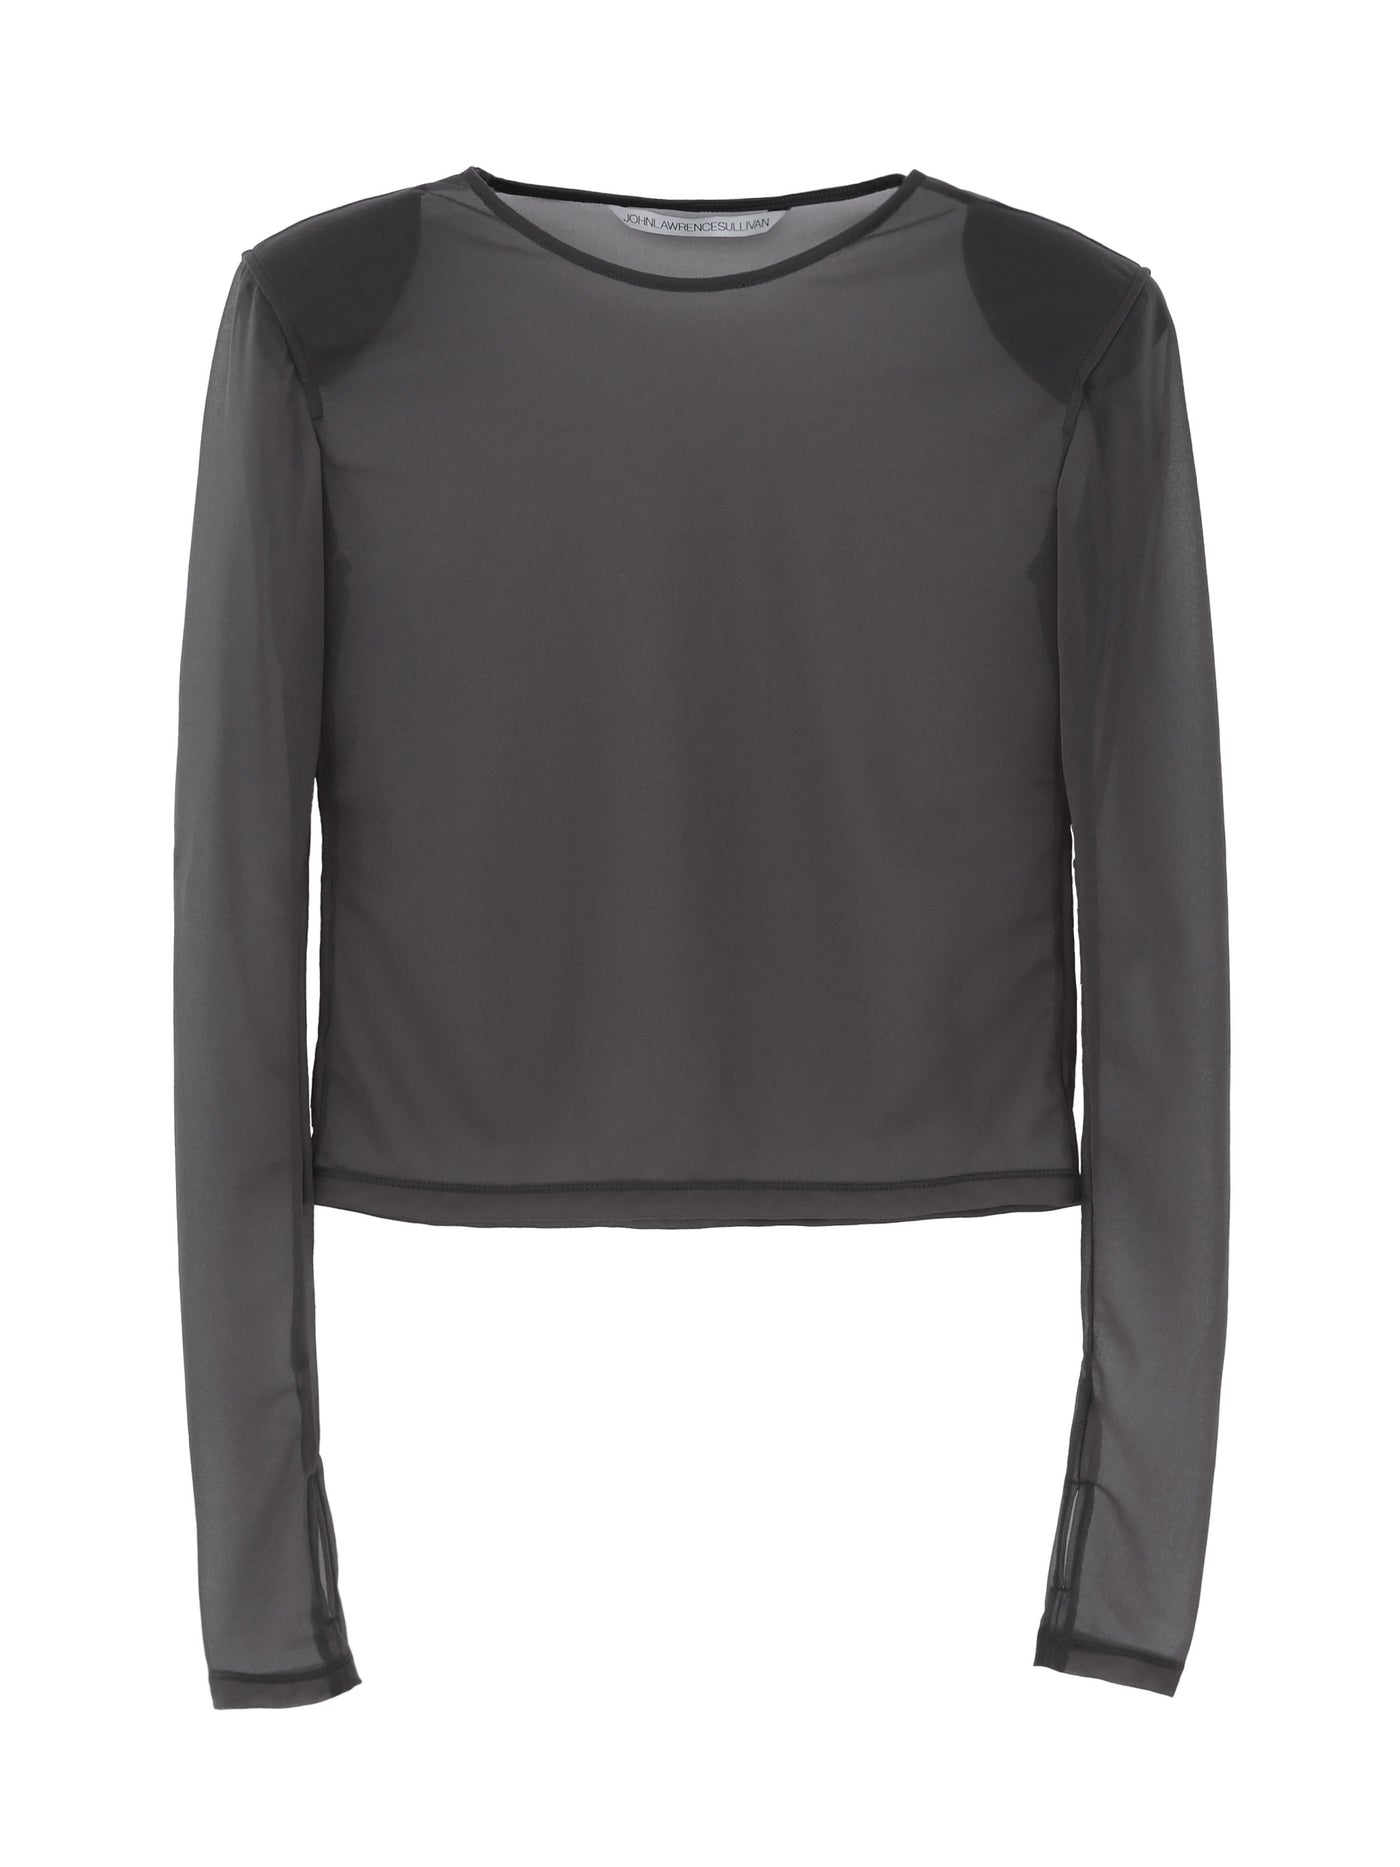 See-through jersey ls top